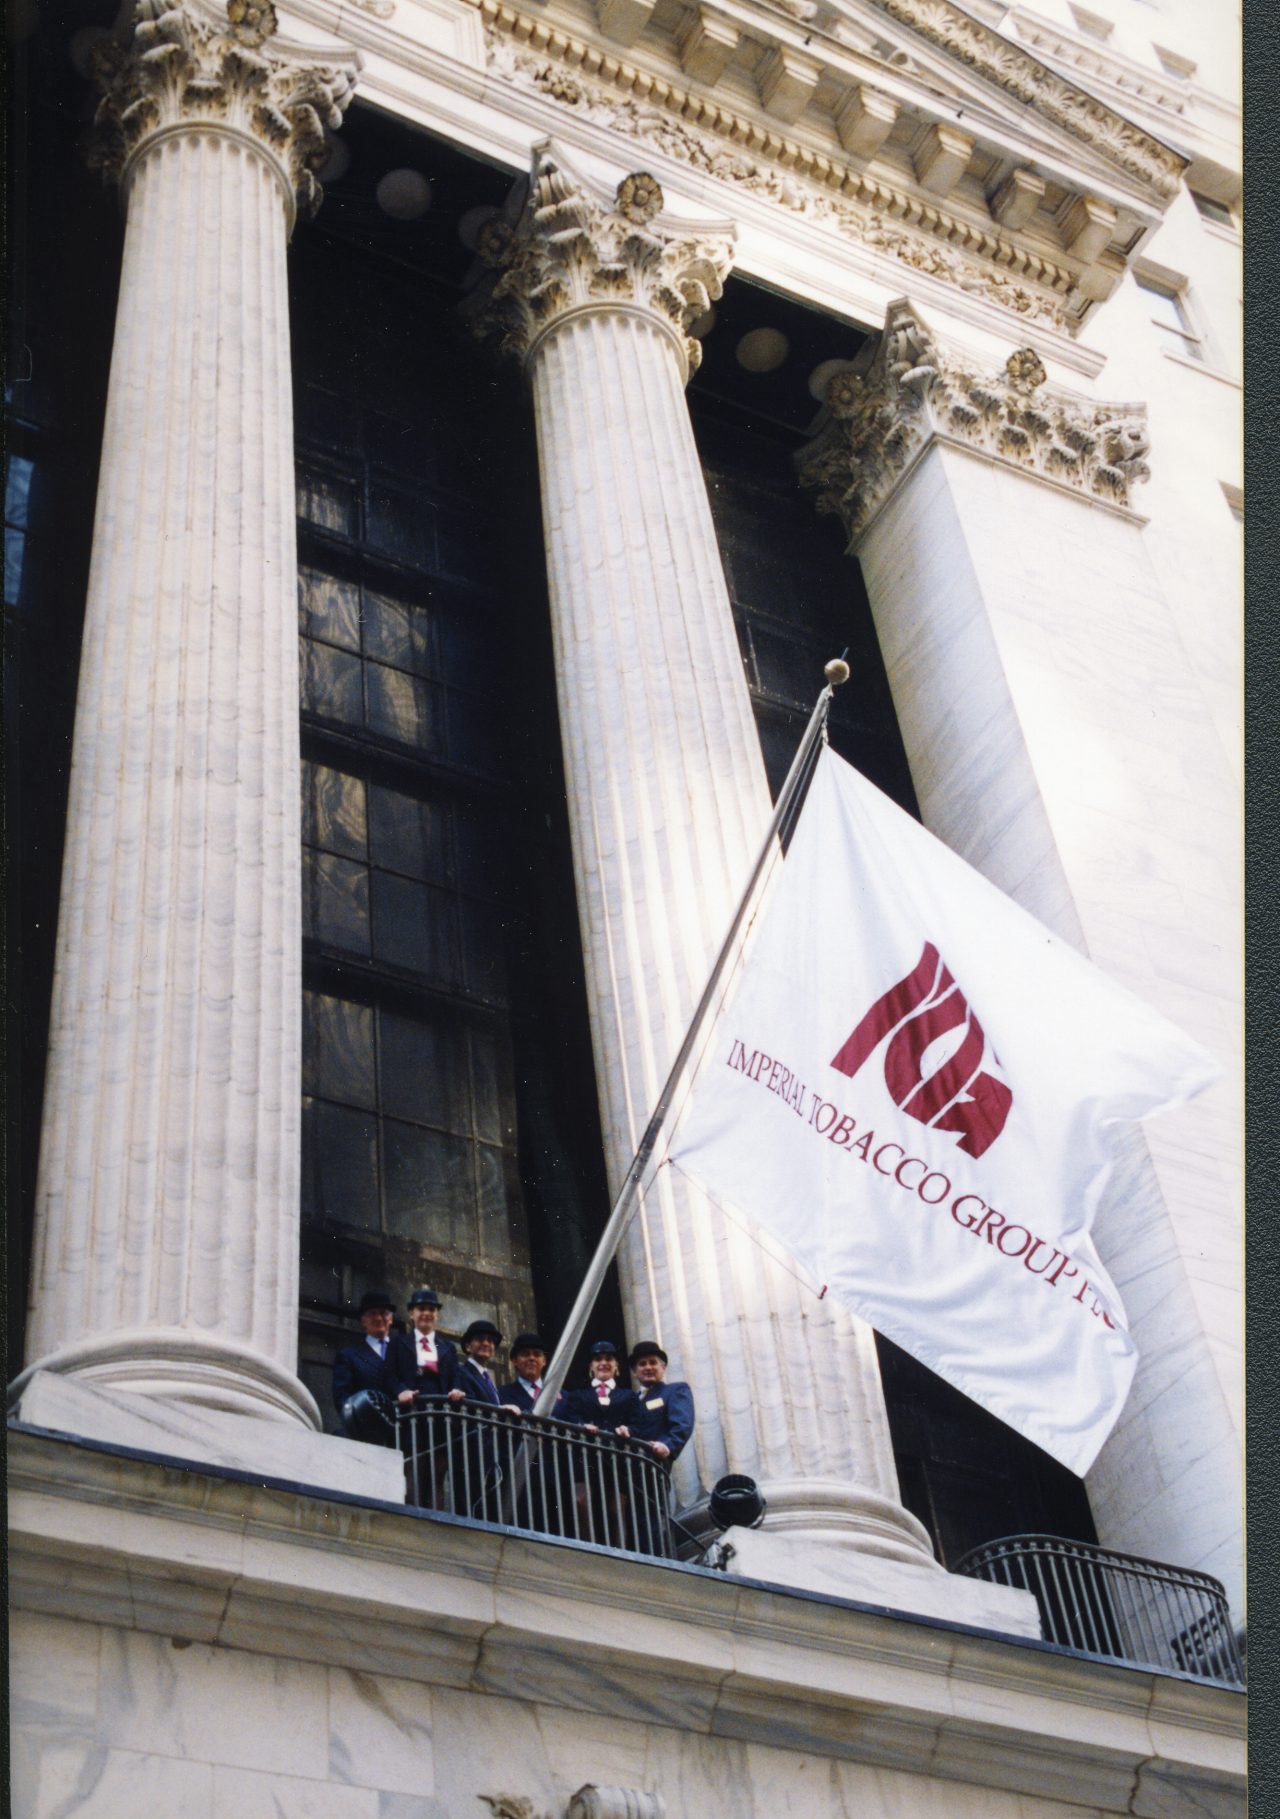 Imperial Tobacco Group plc was listed on the London Stock Exchange in 1996.